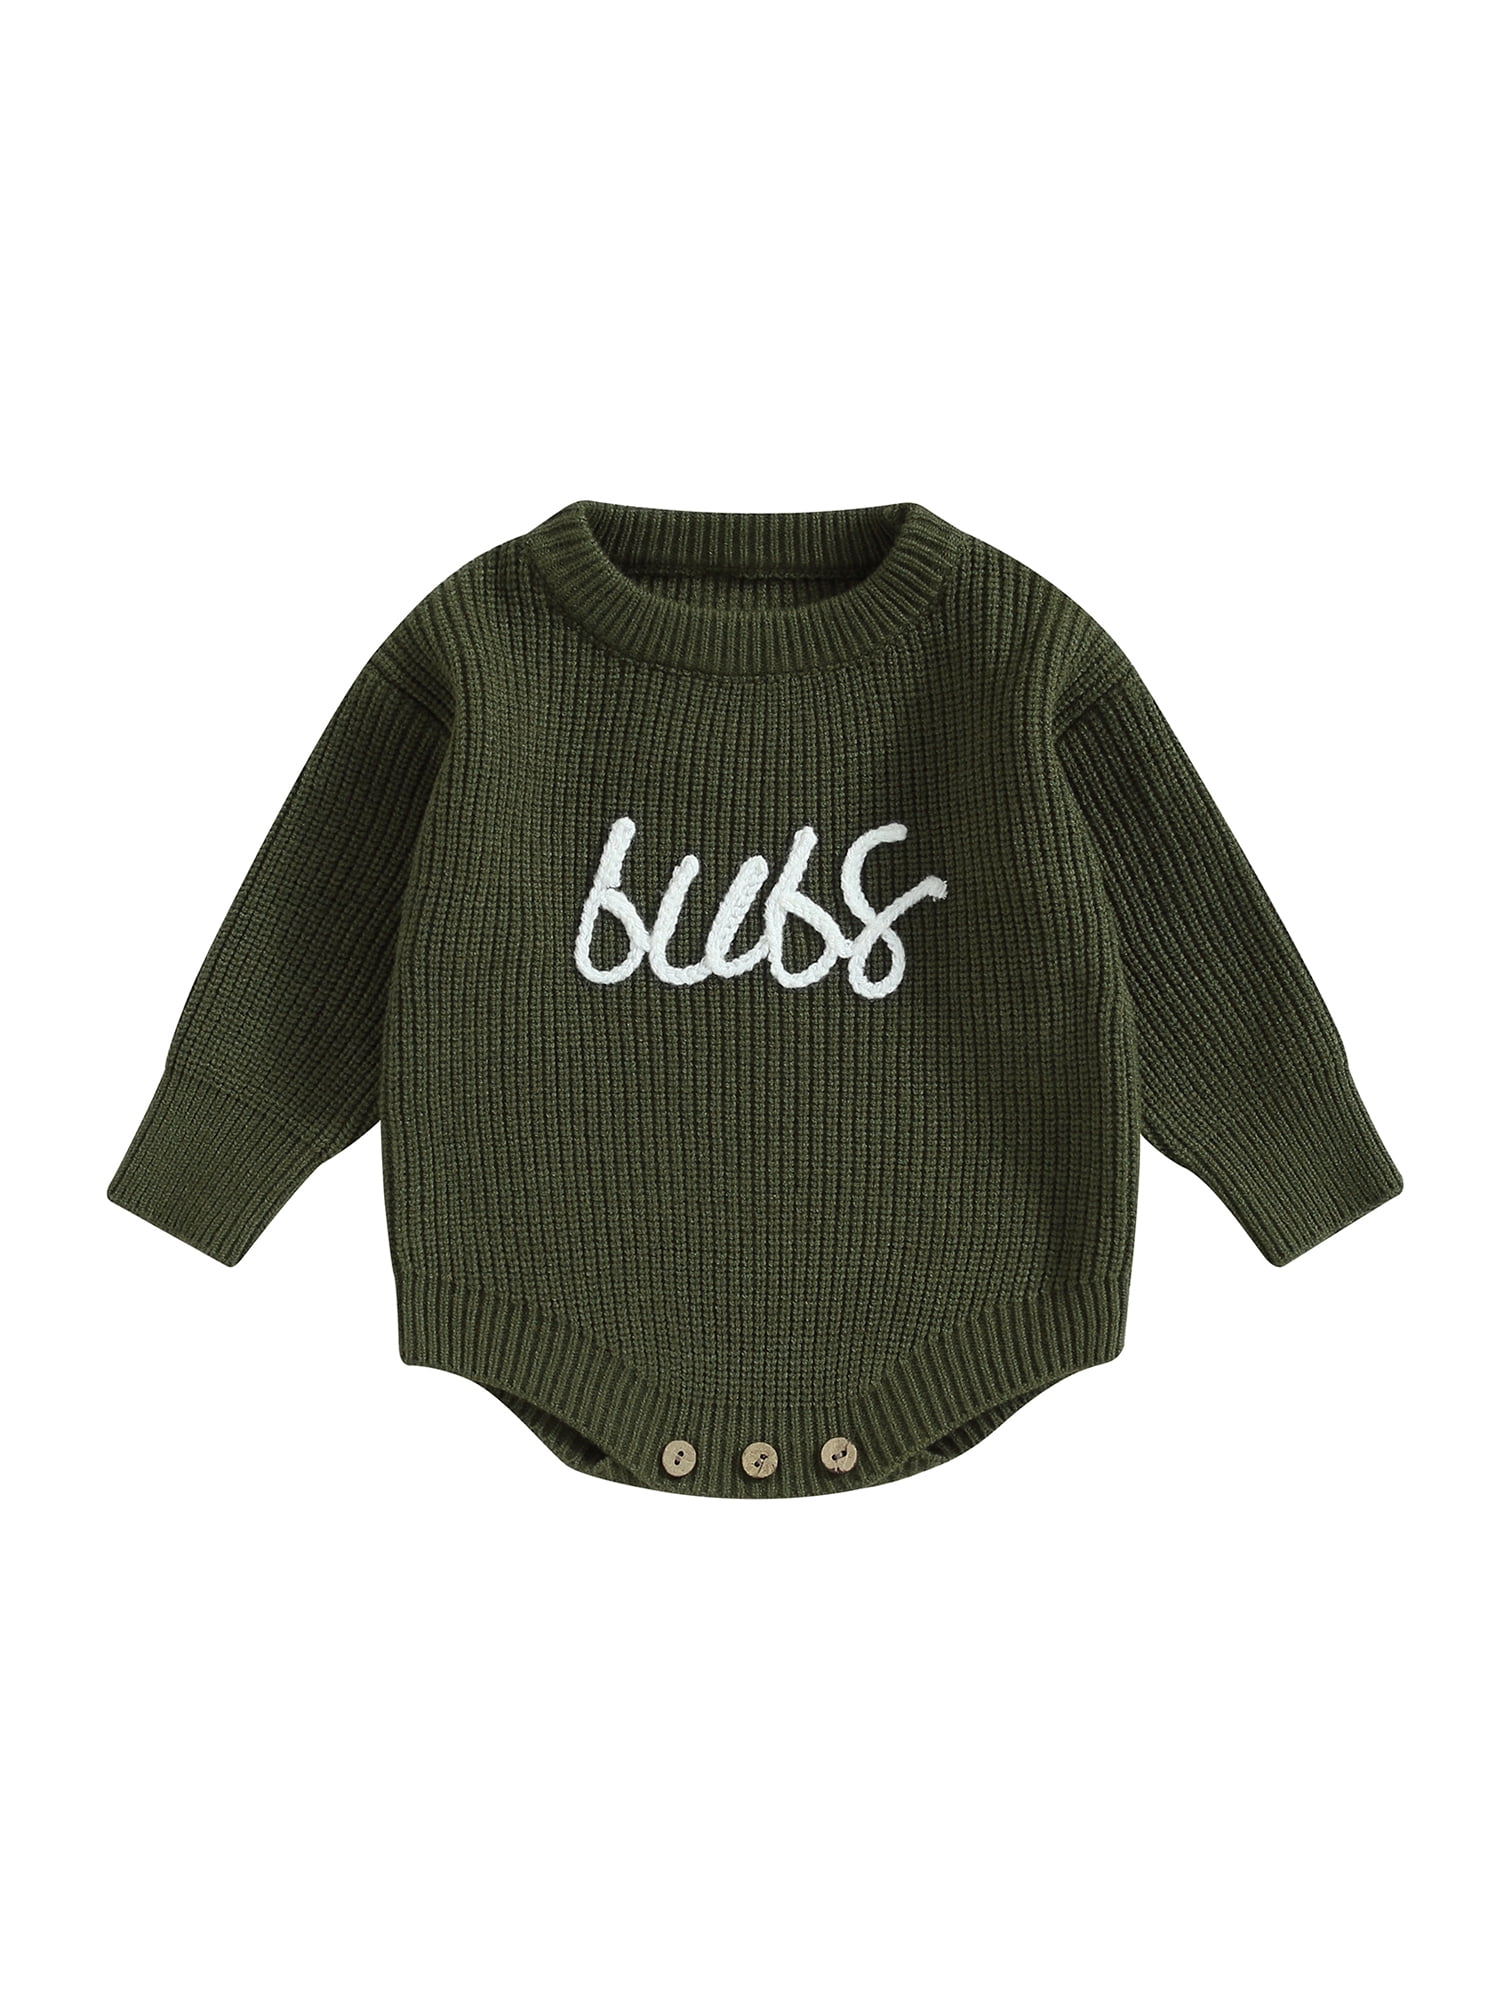 Newborn Baby Girl Boy Knitted Sweater Romper Long Sleeve Ribbed Letter Embroidered Bodysuit